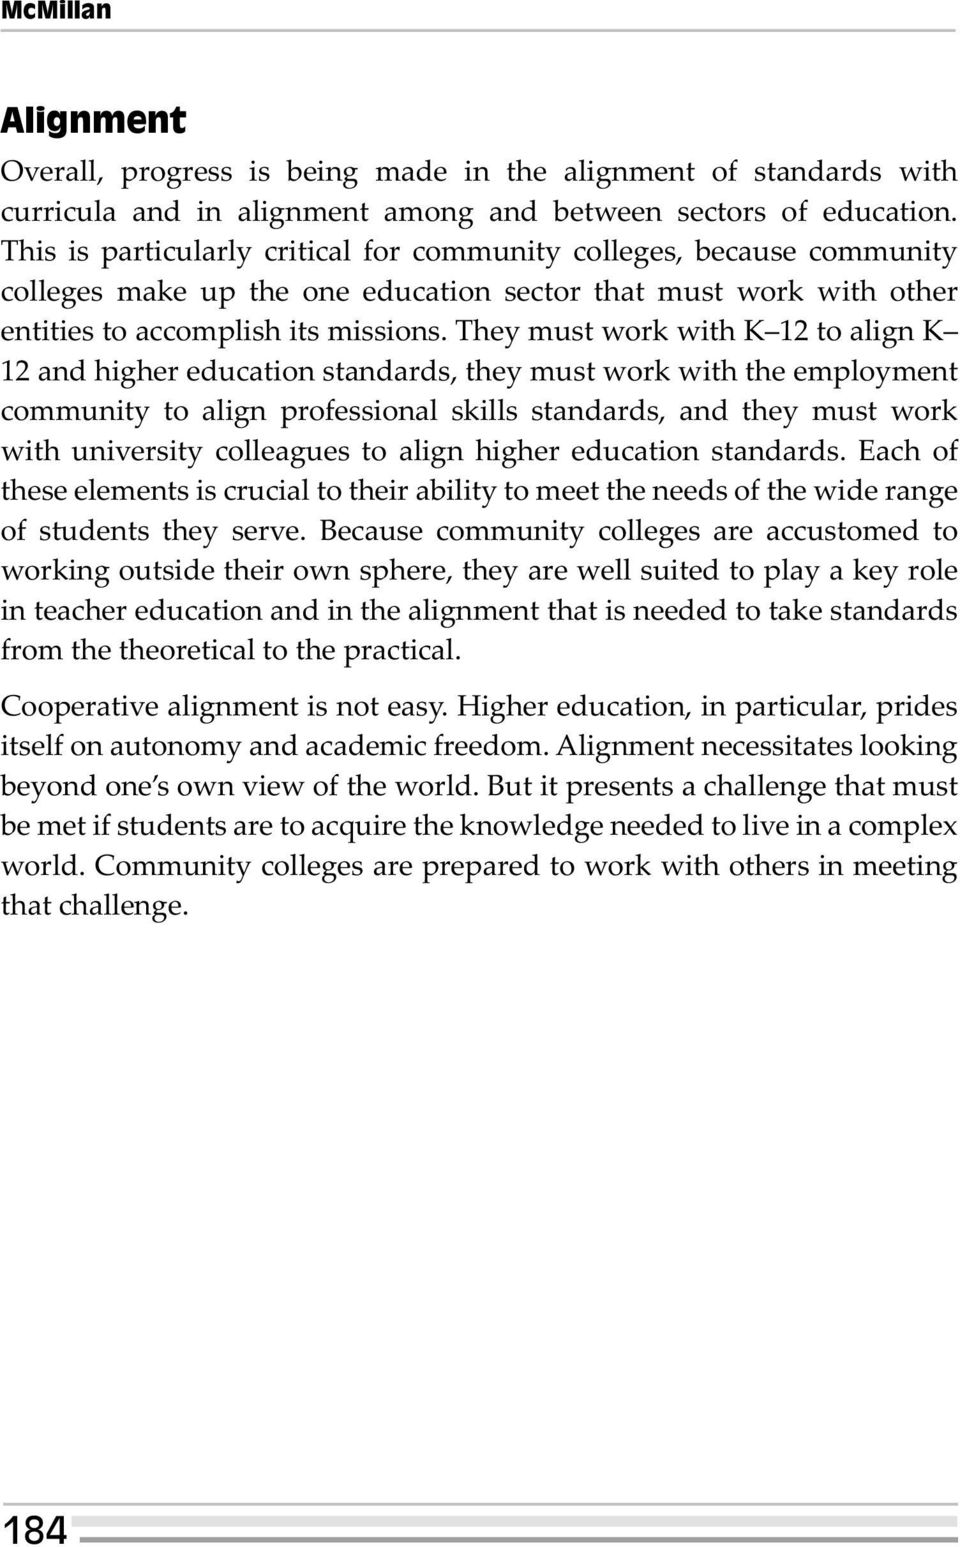 They must work with K 12 to align K 12 and higher education standards, they must work with the employment community to align professional skills standards, and they must work with university